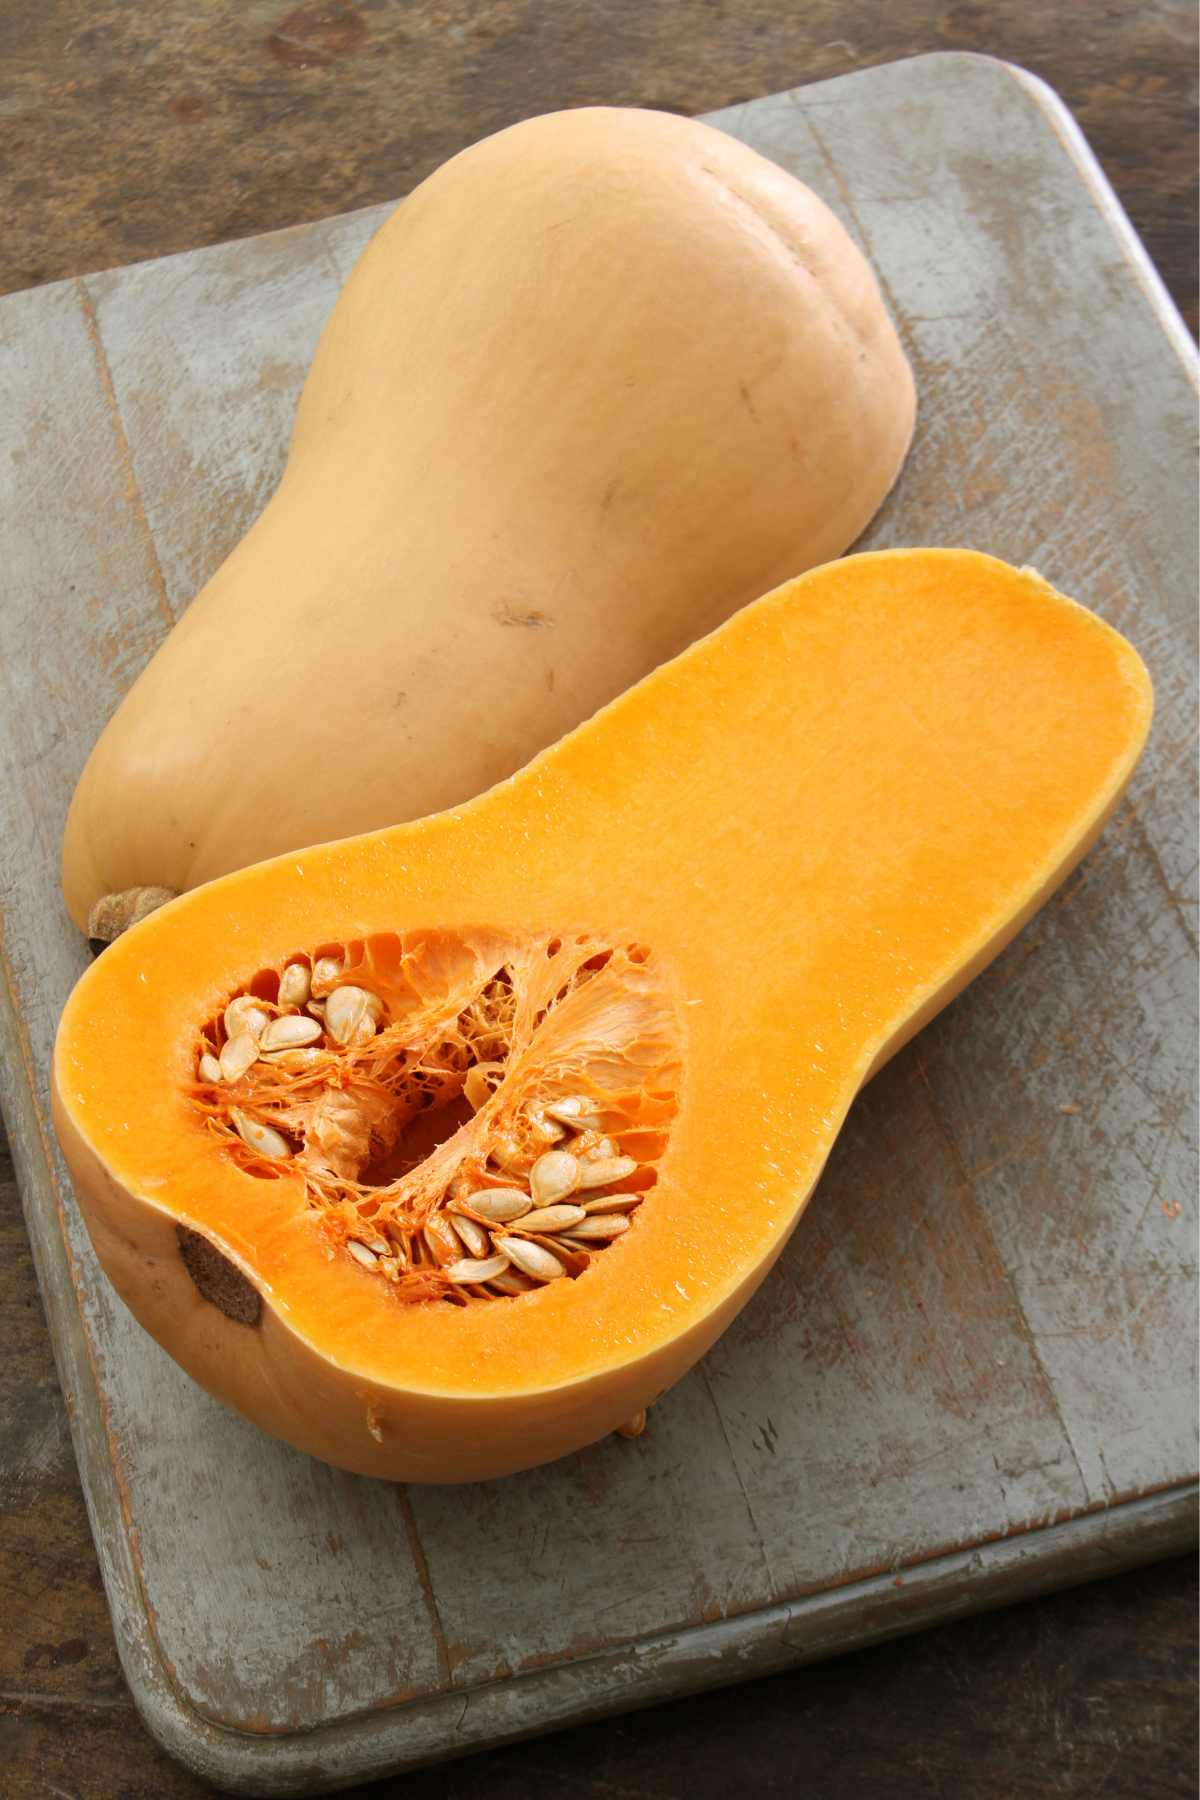 Is butternut squash keto? How many carbs are in butternut squash? If you’re following a ketogenic diet, you may be wondering if butternut squash is off-limits for your low-carb lifestyle. Is there any way to incorporate it into your daily meal plan while doing keto?